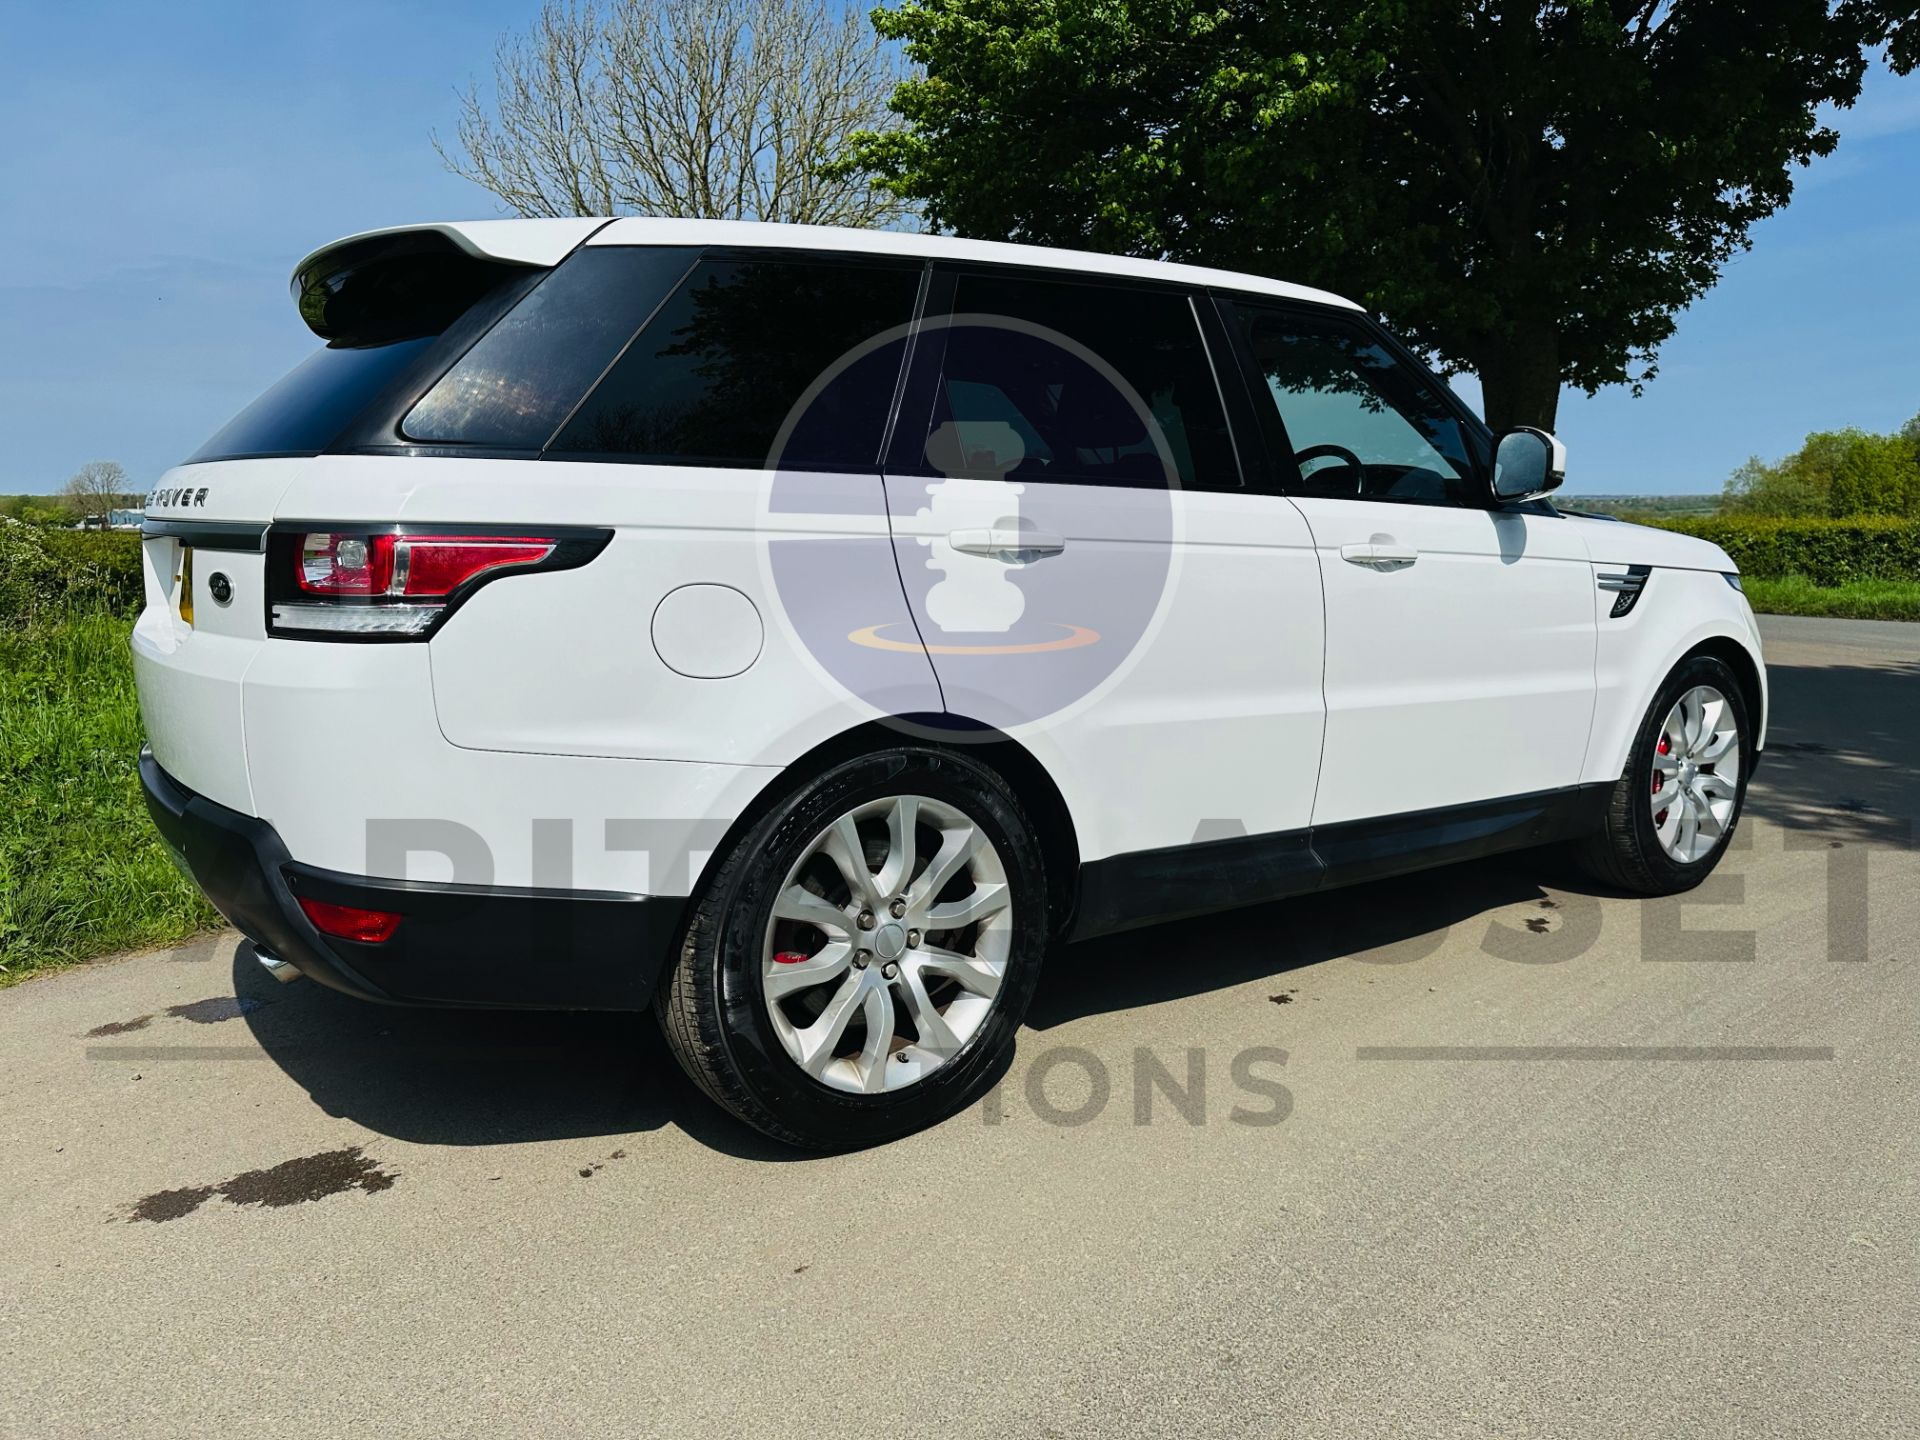 RANGE ROVER SPORT *HSE EDITION* (2016 - FACELIFT MODEL) 3.0 SDV6 - 306 BHP - AUTOMATIC *HUGE SPEC* - Image 15 of 53